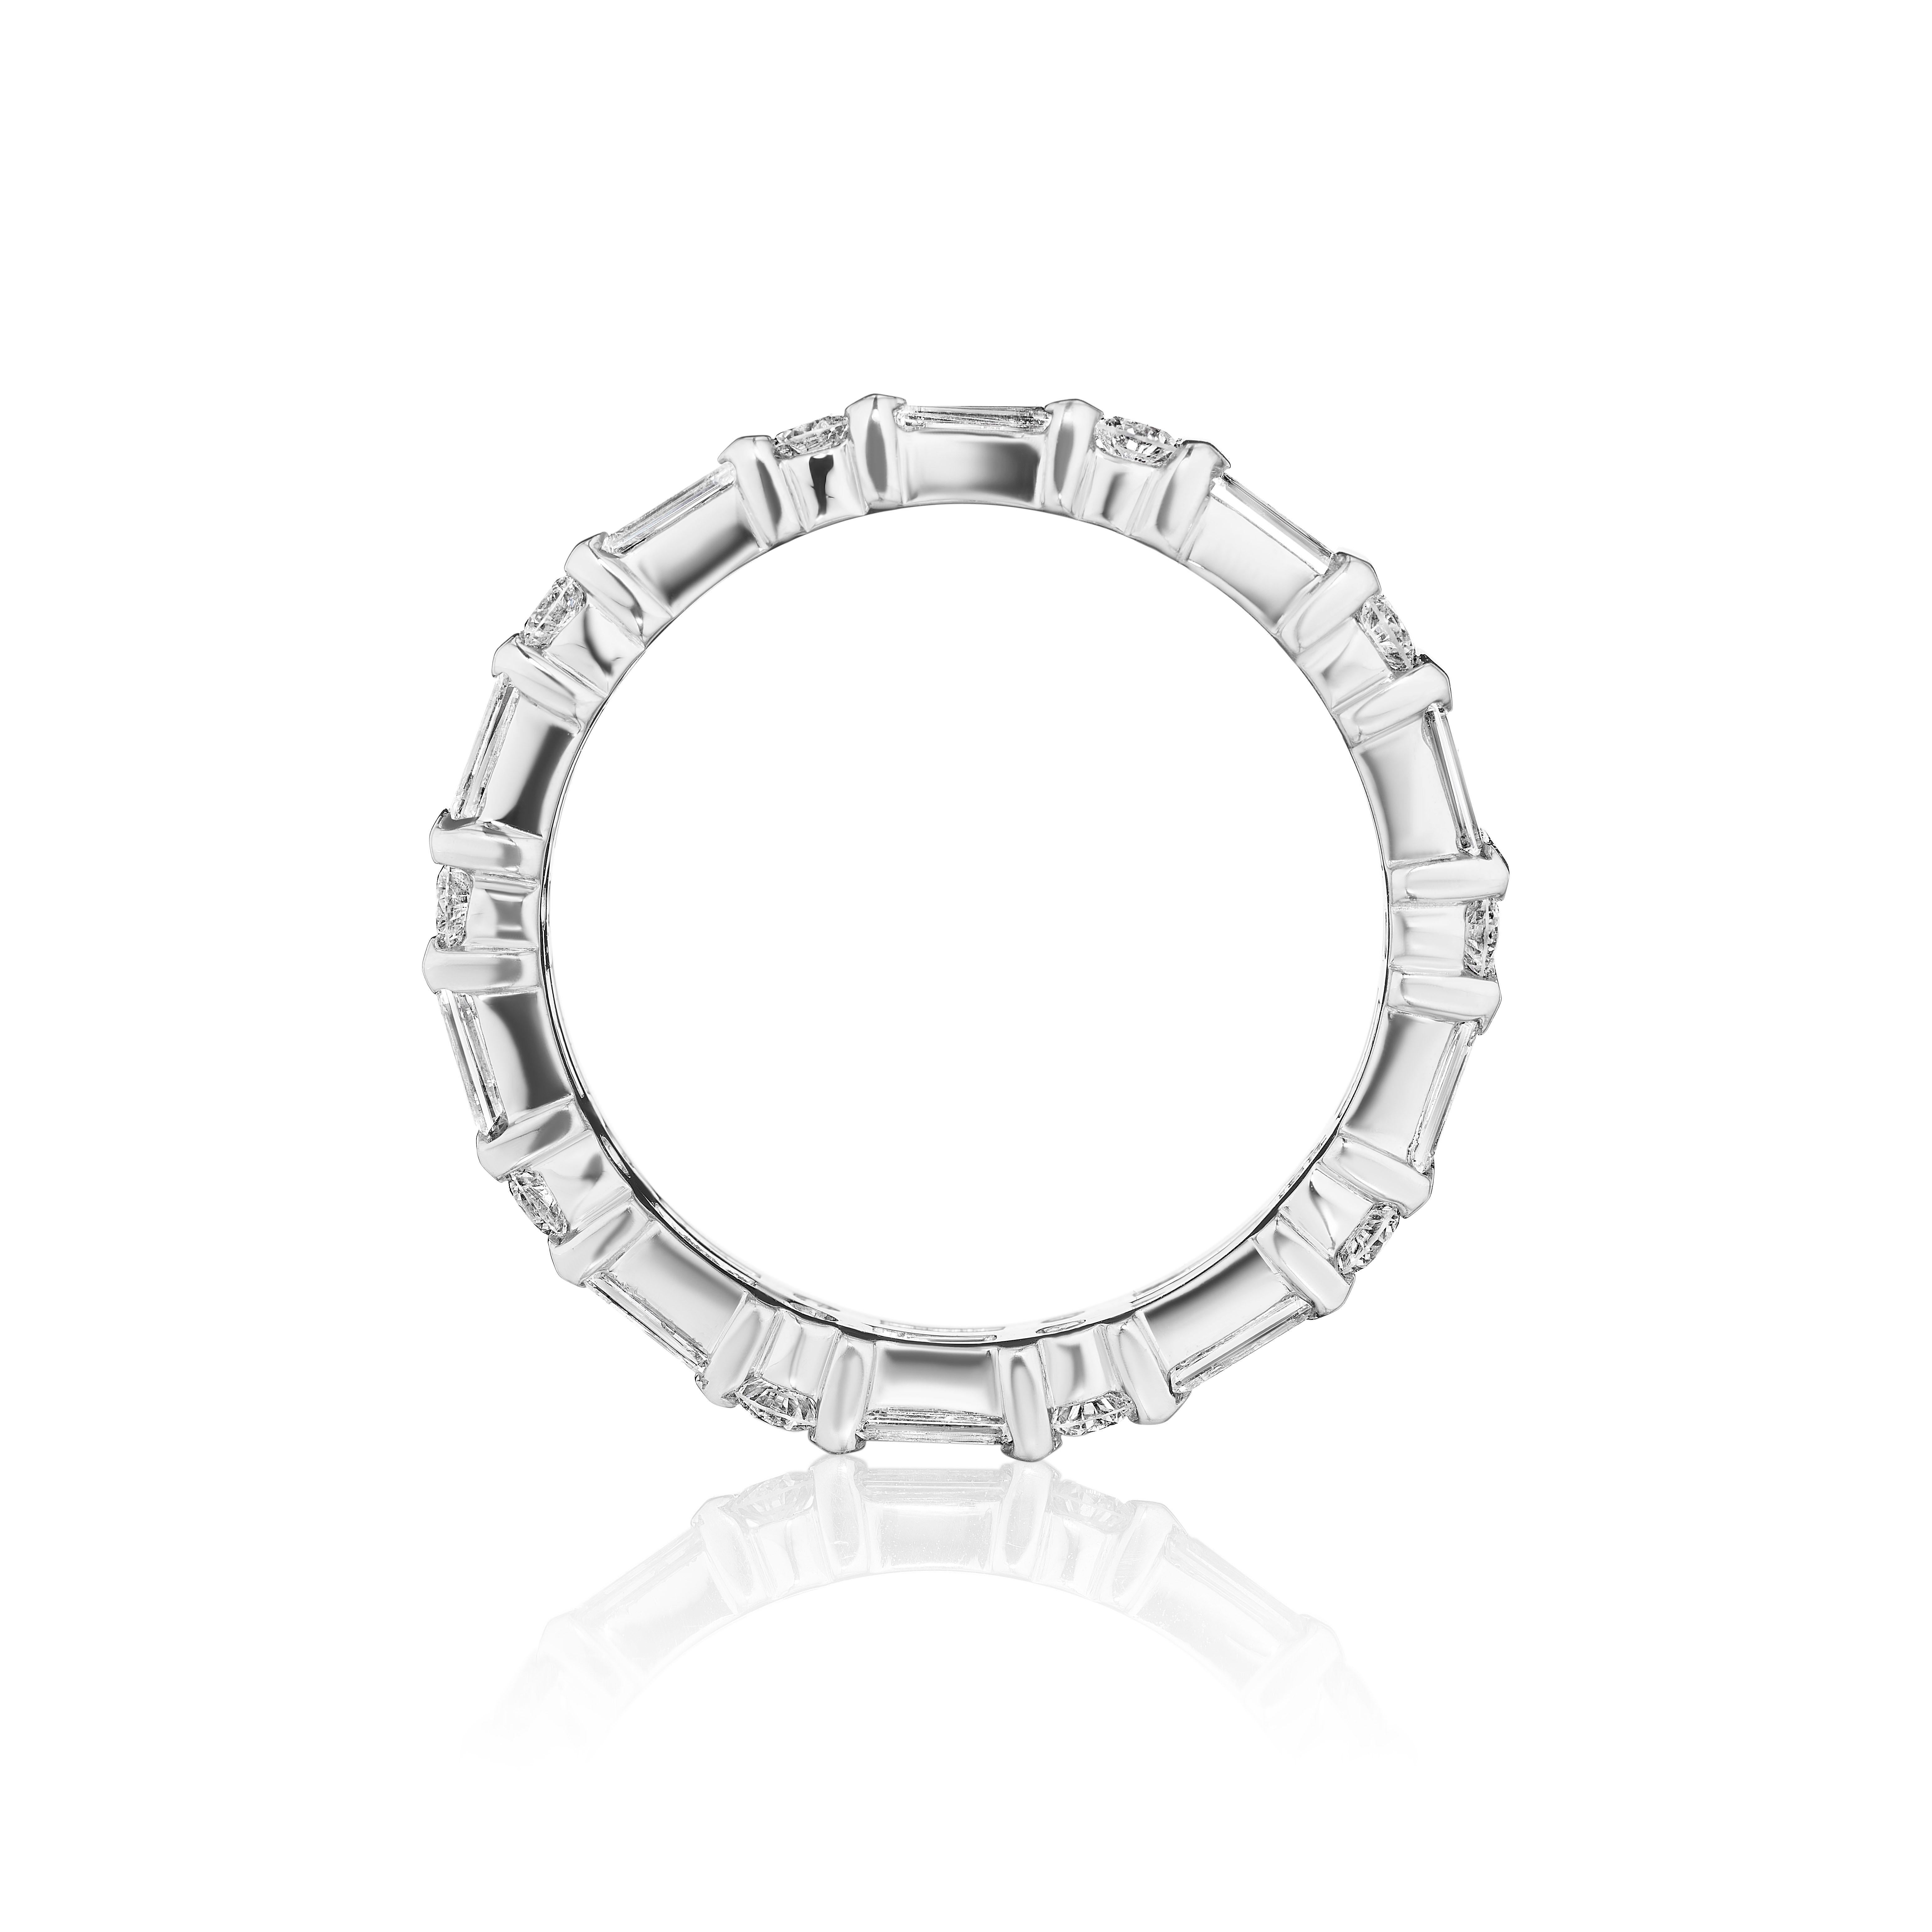 • Crafted in 18KT White Gold, this eternity band is made with 40 alternating round and baguette cut diamonds. The diamonds are secured in a bar setting and has a combining total weight of approximately 1.75 carats.
Worn beautifully on its own or